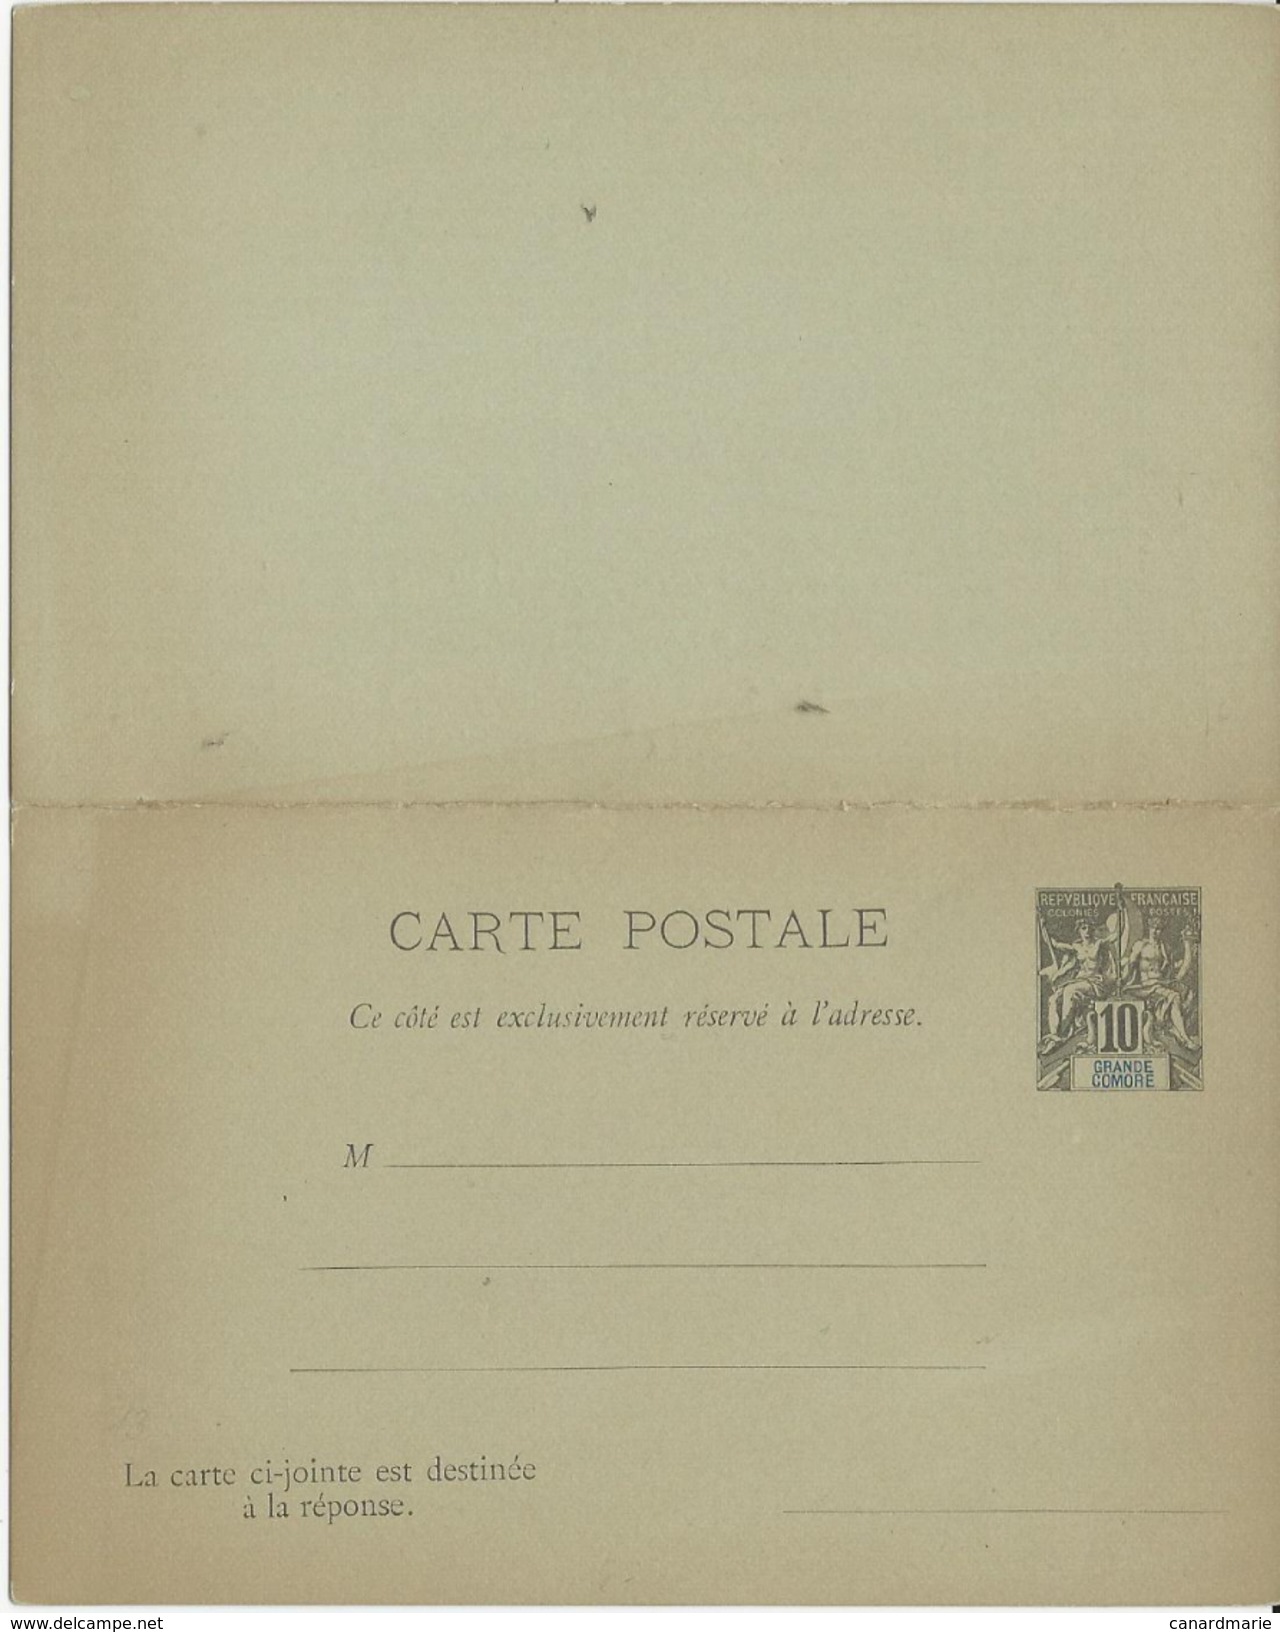 2 ENTIERS POSTAUX NEUFS A 10 CT AVEC REPONSE PAYEE - Covers & Documents